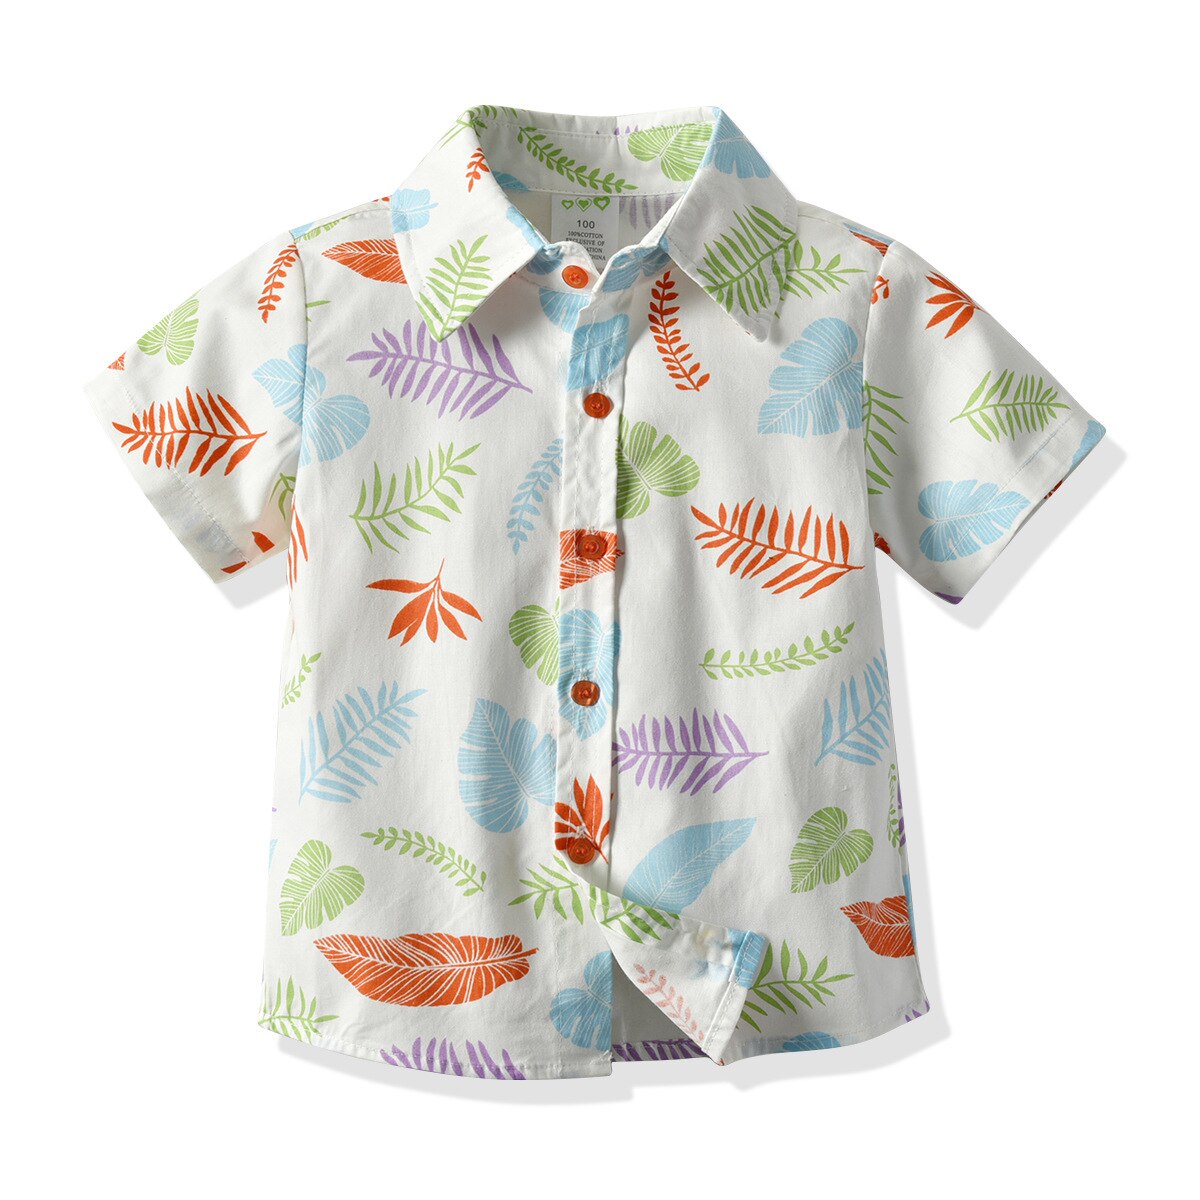 Summer Infant Boys Shirt Colorful Leaves Printing Short Sleeve Lapel Single-breasted Top Children Casual Clothes